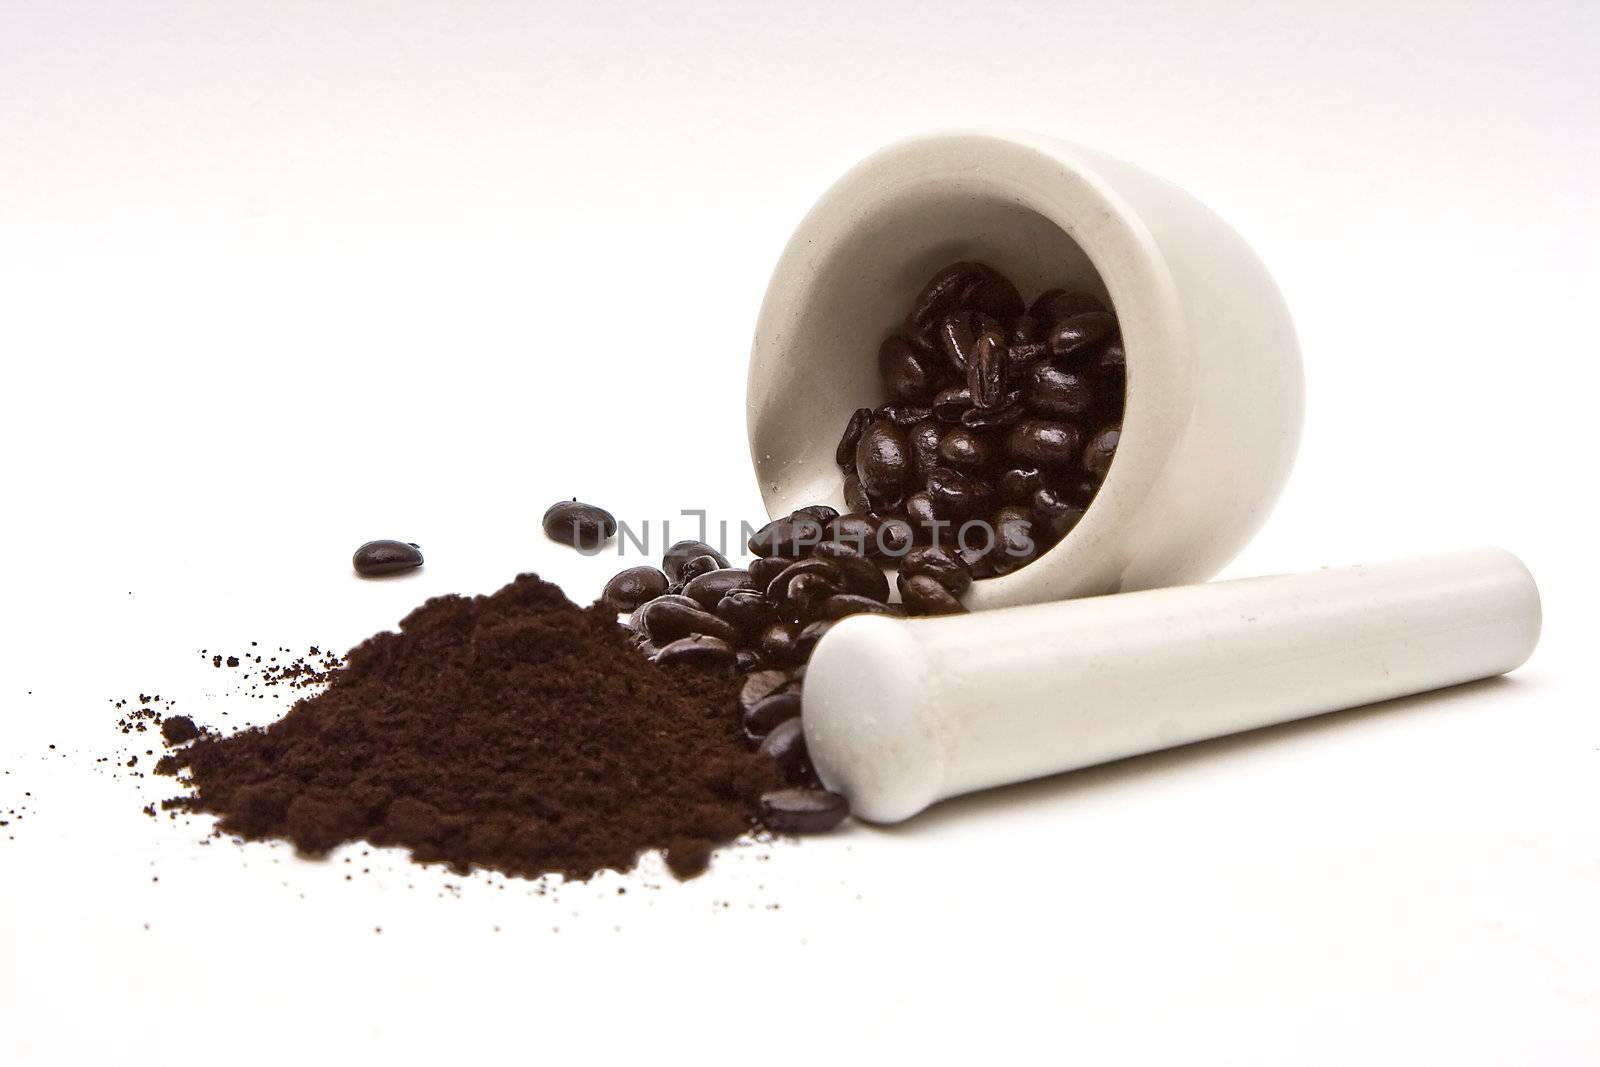 A mortar with freshly roasted coffee beans spilled out with in front a pile of coffee grind; on a white background